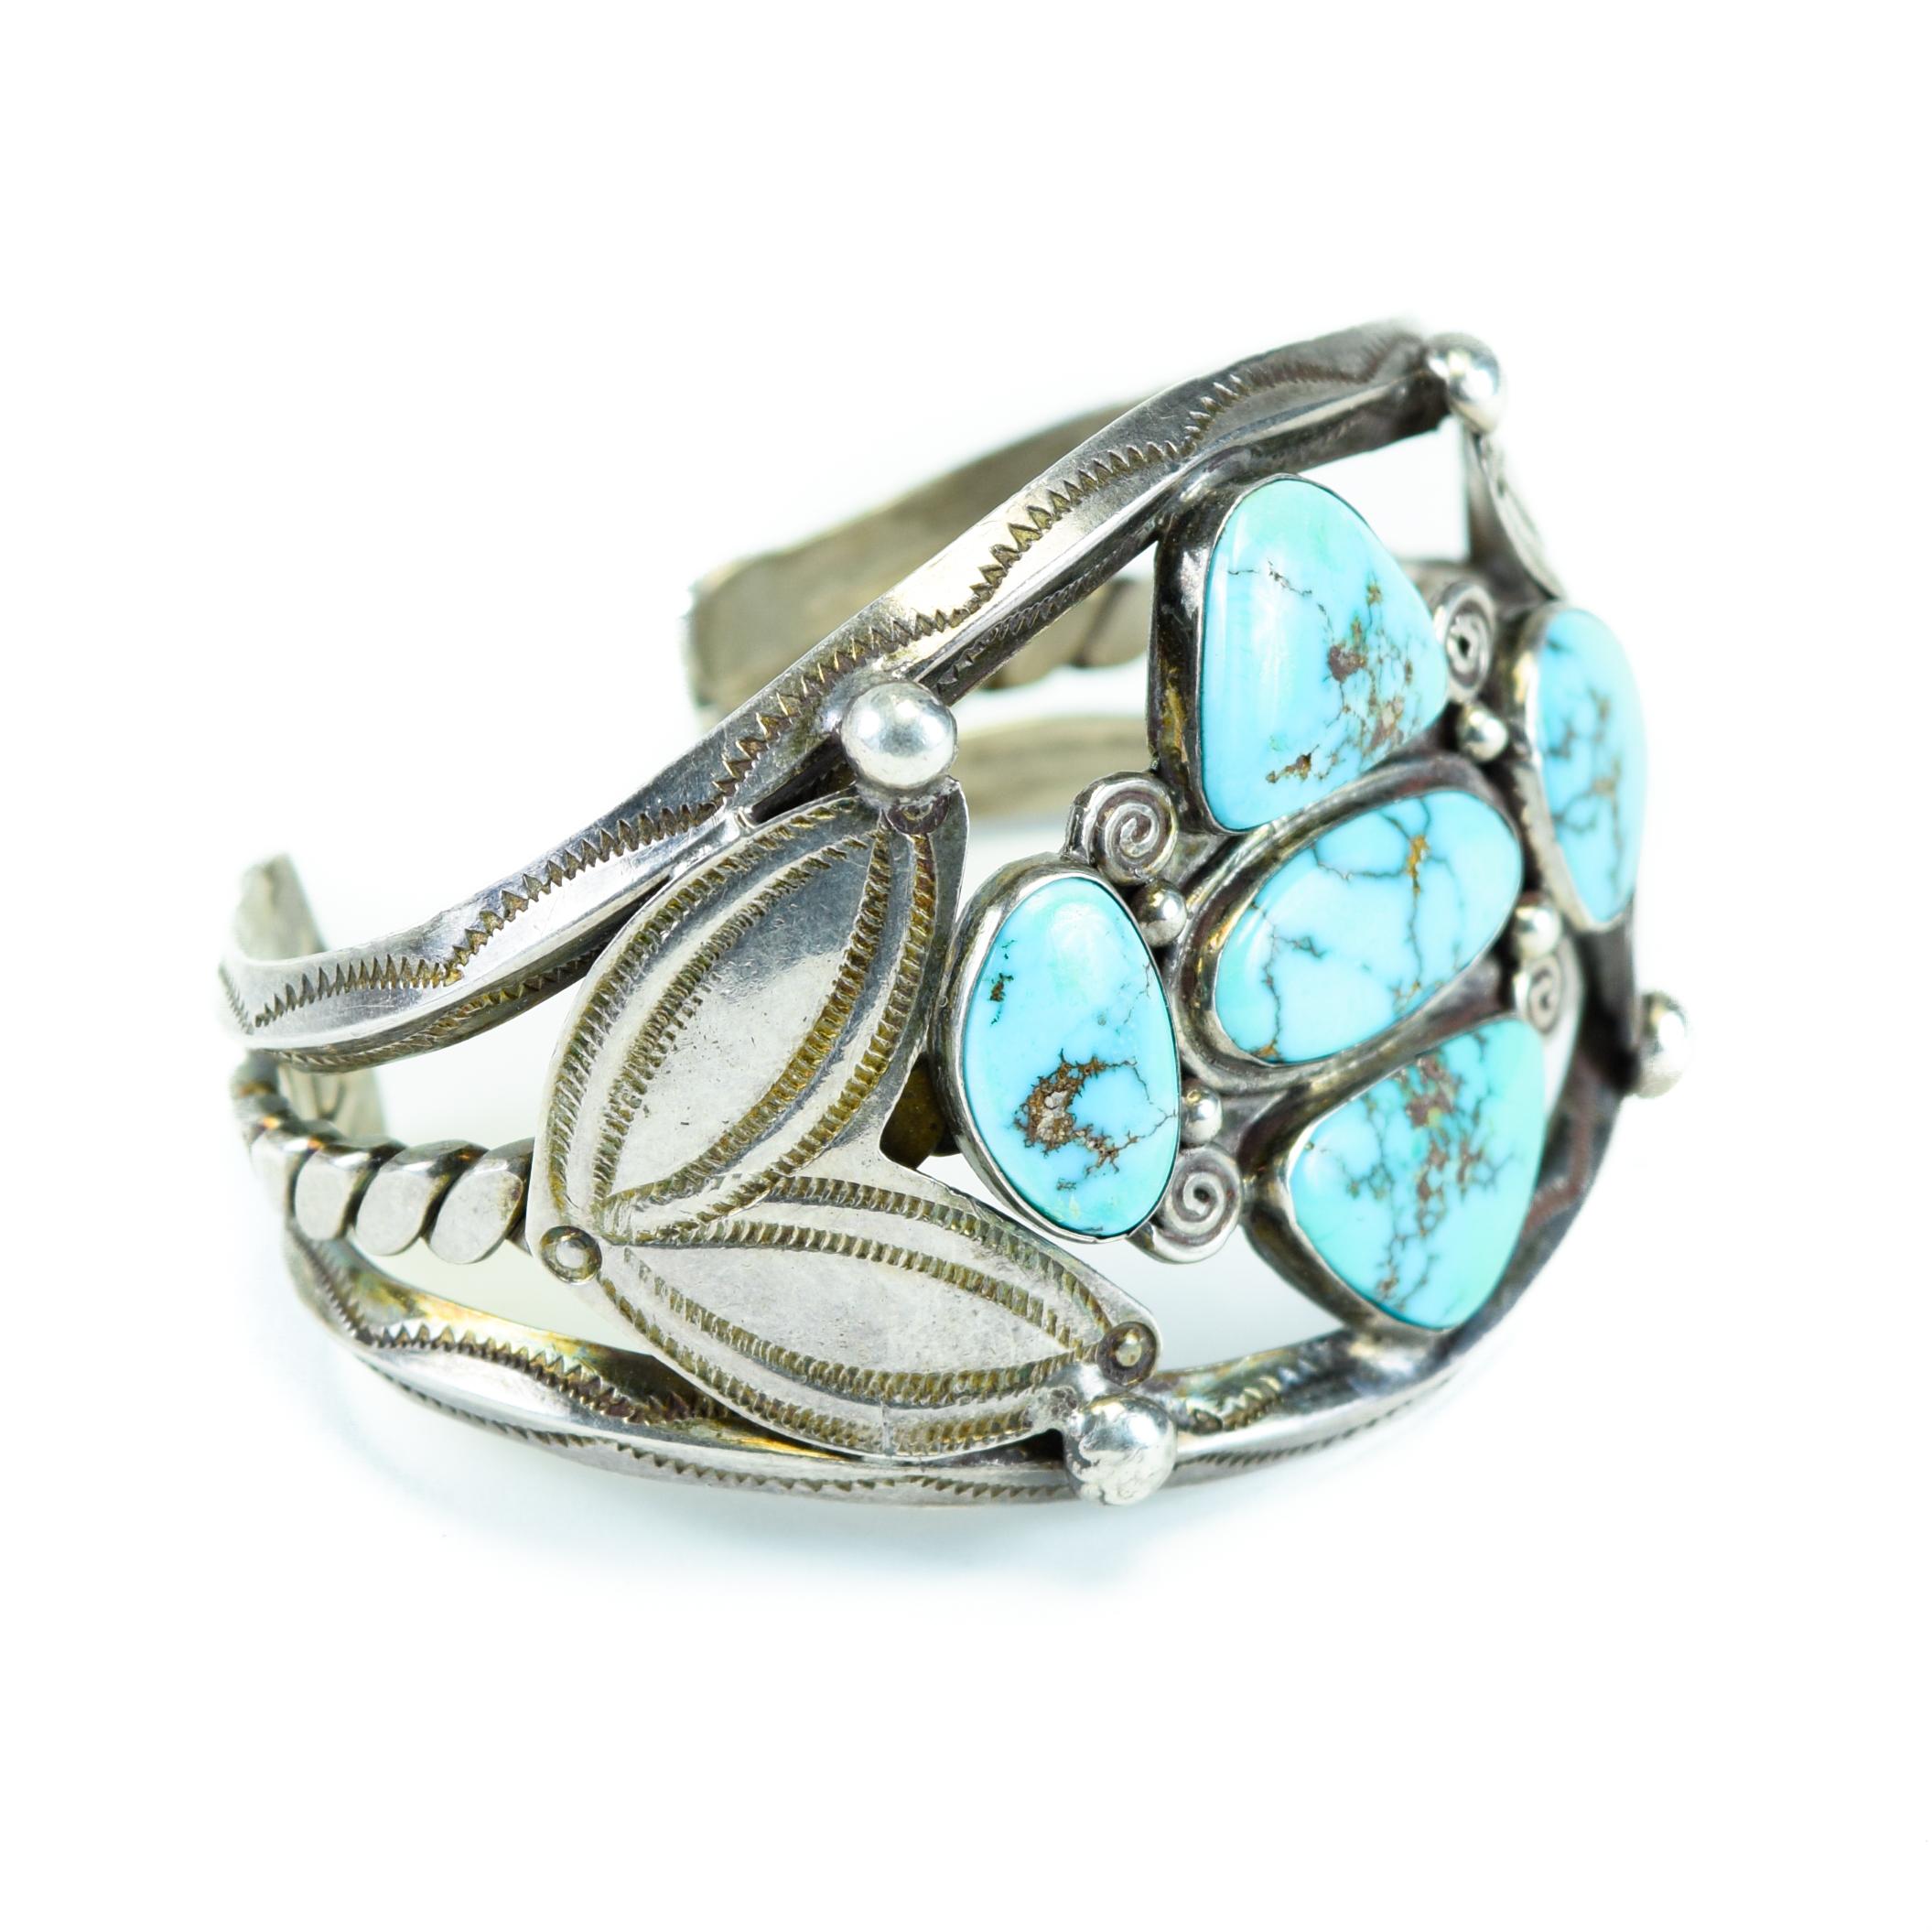 Exceptional Morenci turquoise cuff bracelet. Five matching stones, with double hand-stamped leaf design on each side.

PERIOD: 1950s
ORIGIN: Navajo, Southwest
SIZE: 2